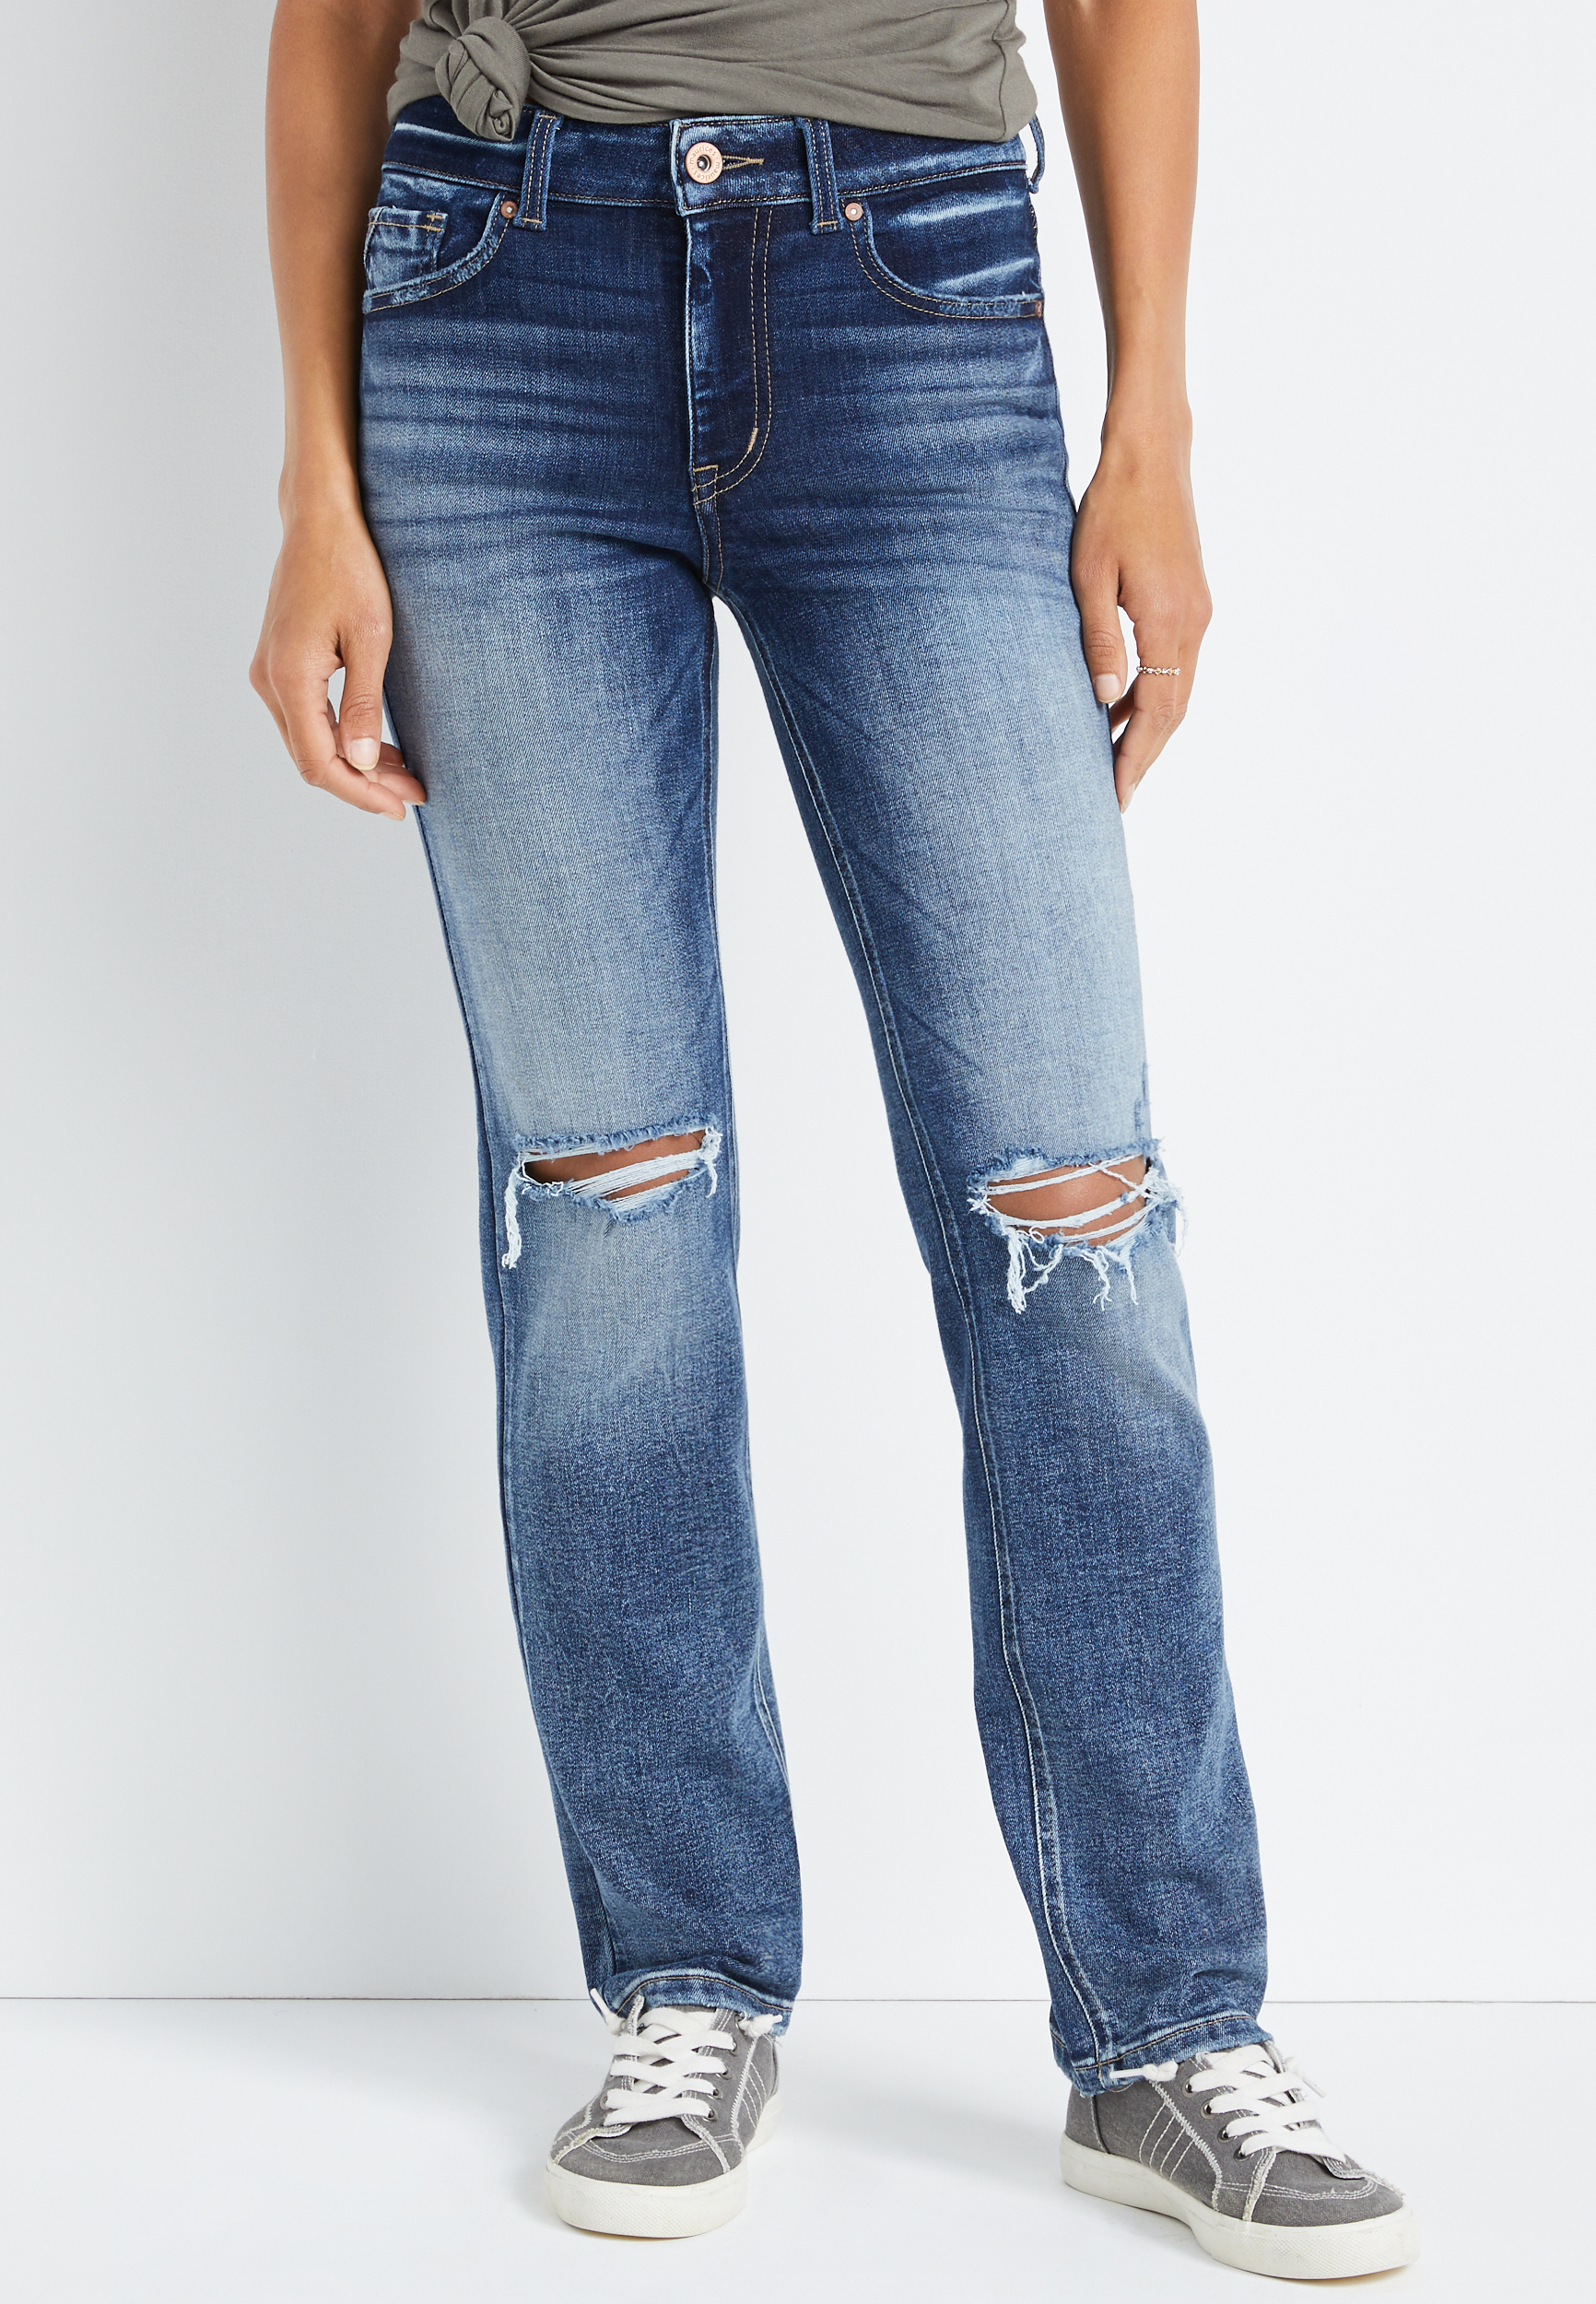 pad medarbejder ihærdige edgely™ Straight High Rise Ripped Jean | maurices